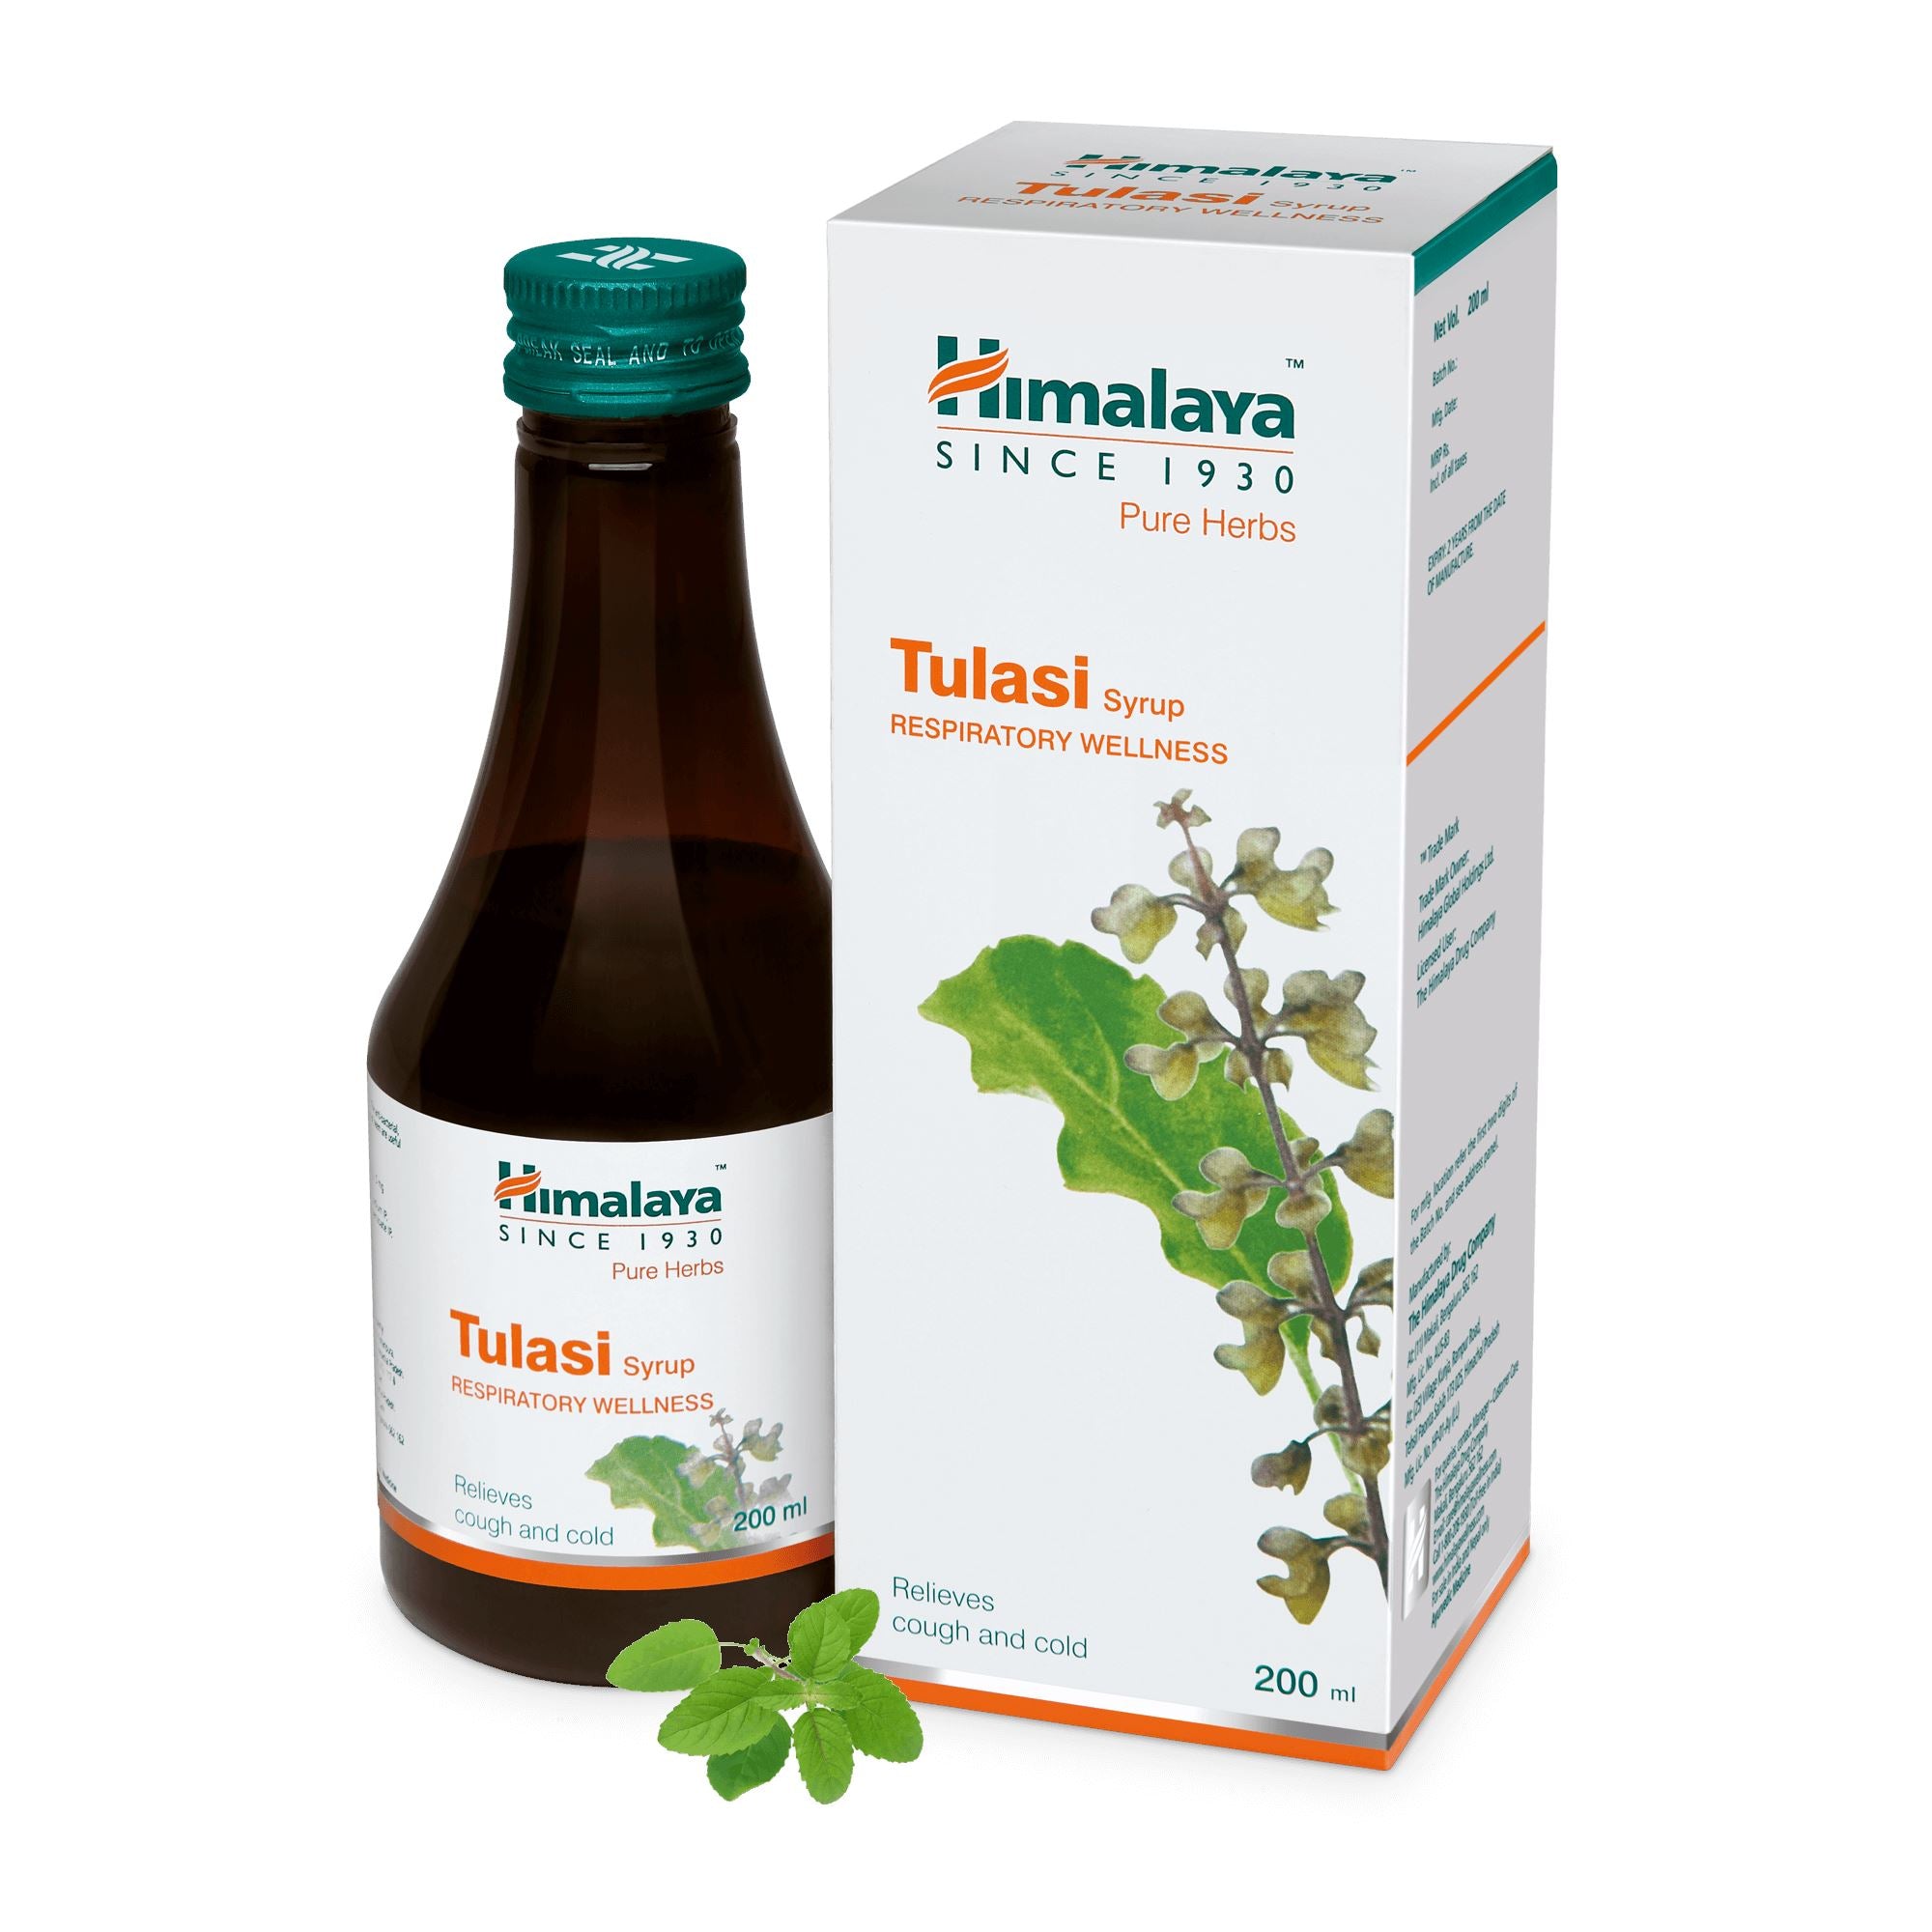 Himalaya Tulasi Syrup 200ml - Relieves Cough and Cold